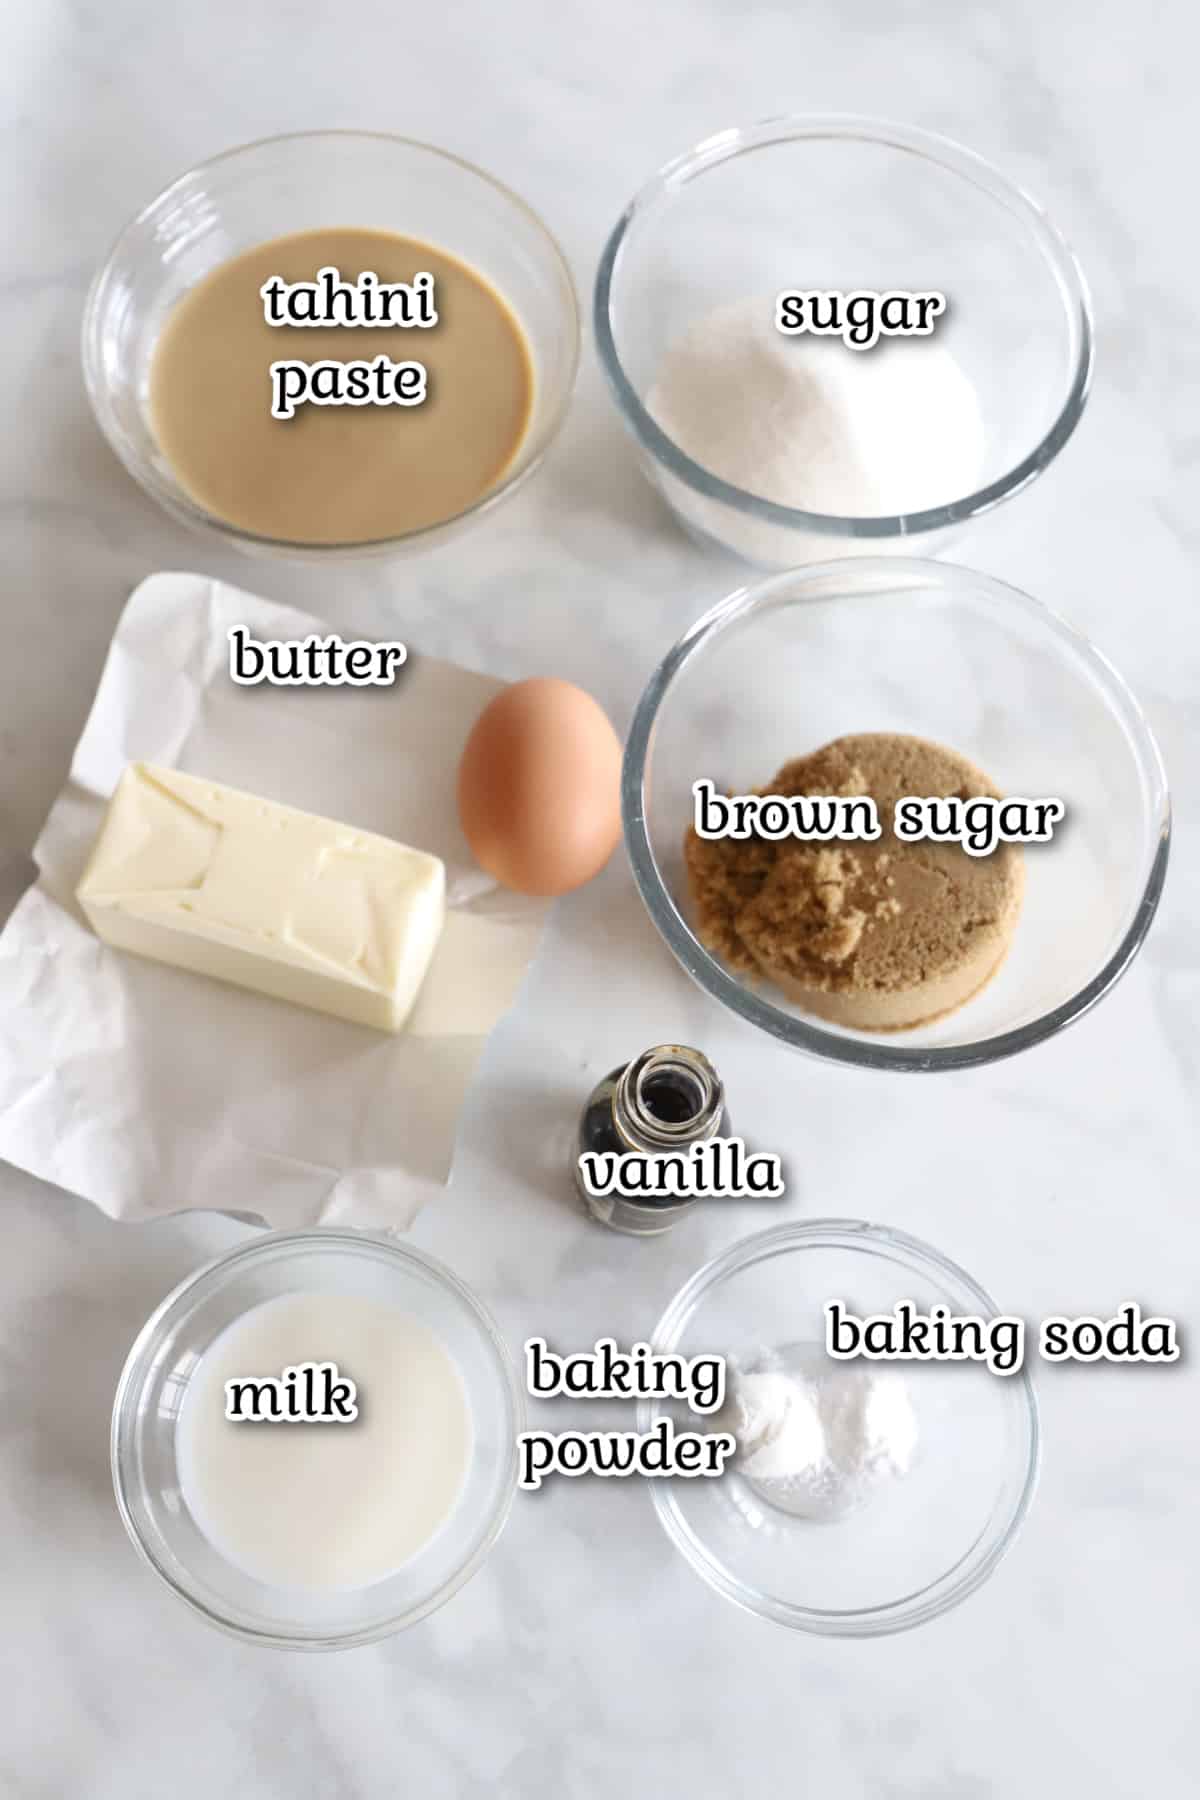 Ingredients image for this recipe with text overlay.